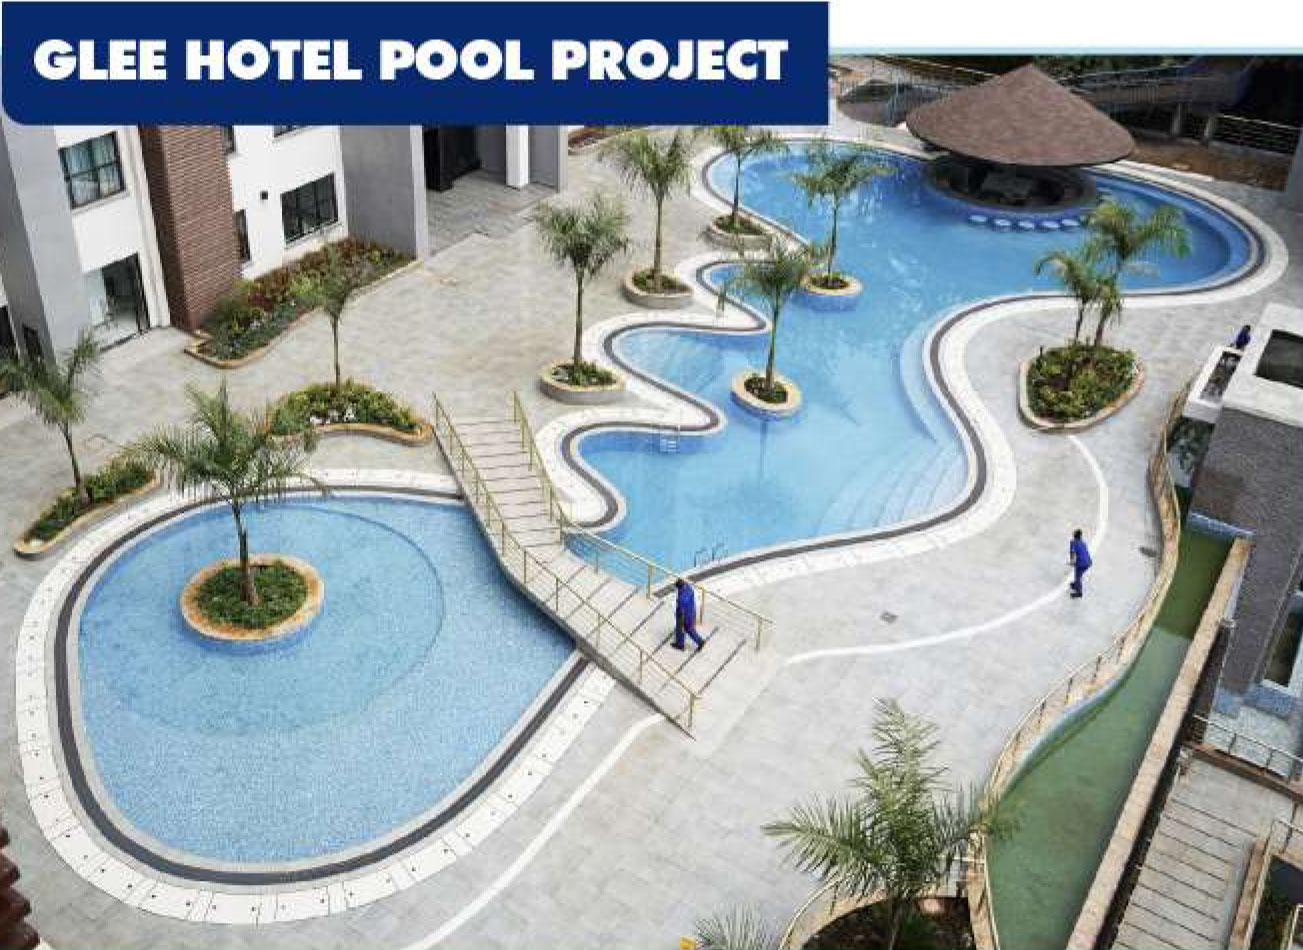 Swimming pool project done by Davis & Shirtliff for Glee Hotel